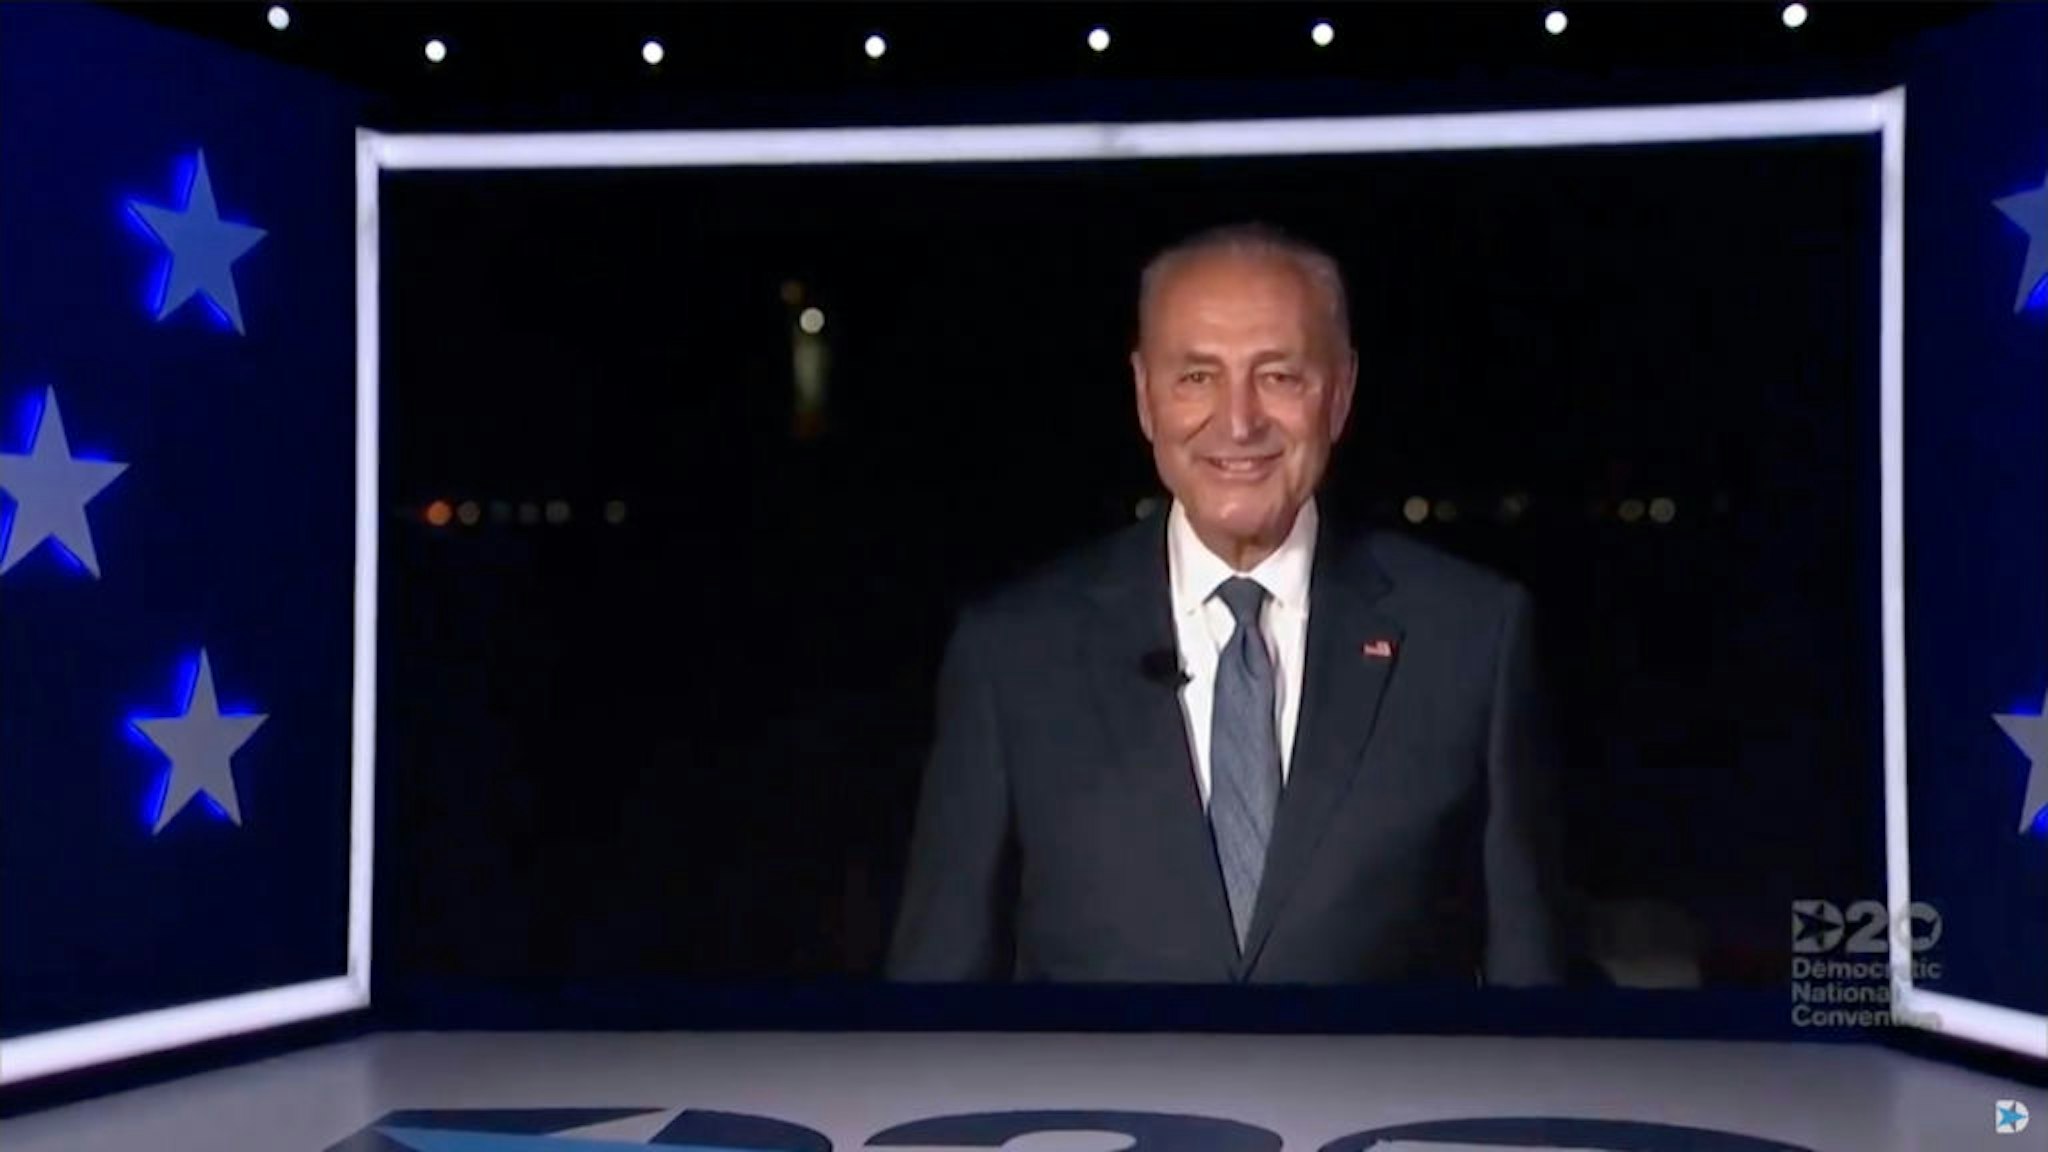 In this screenshot from the DNCC’s livestream of the 2020 Democratic National Convention, Senate Minority Leader Sen. Charles Schumer (D-NY) addresses the virtual convention on August 18, 2020.